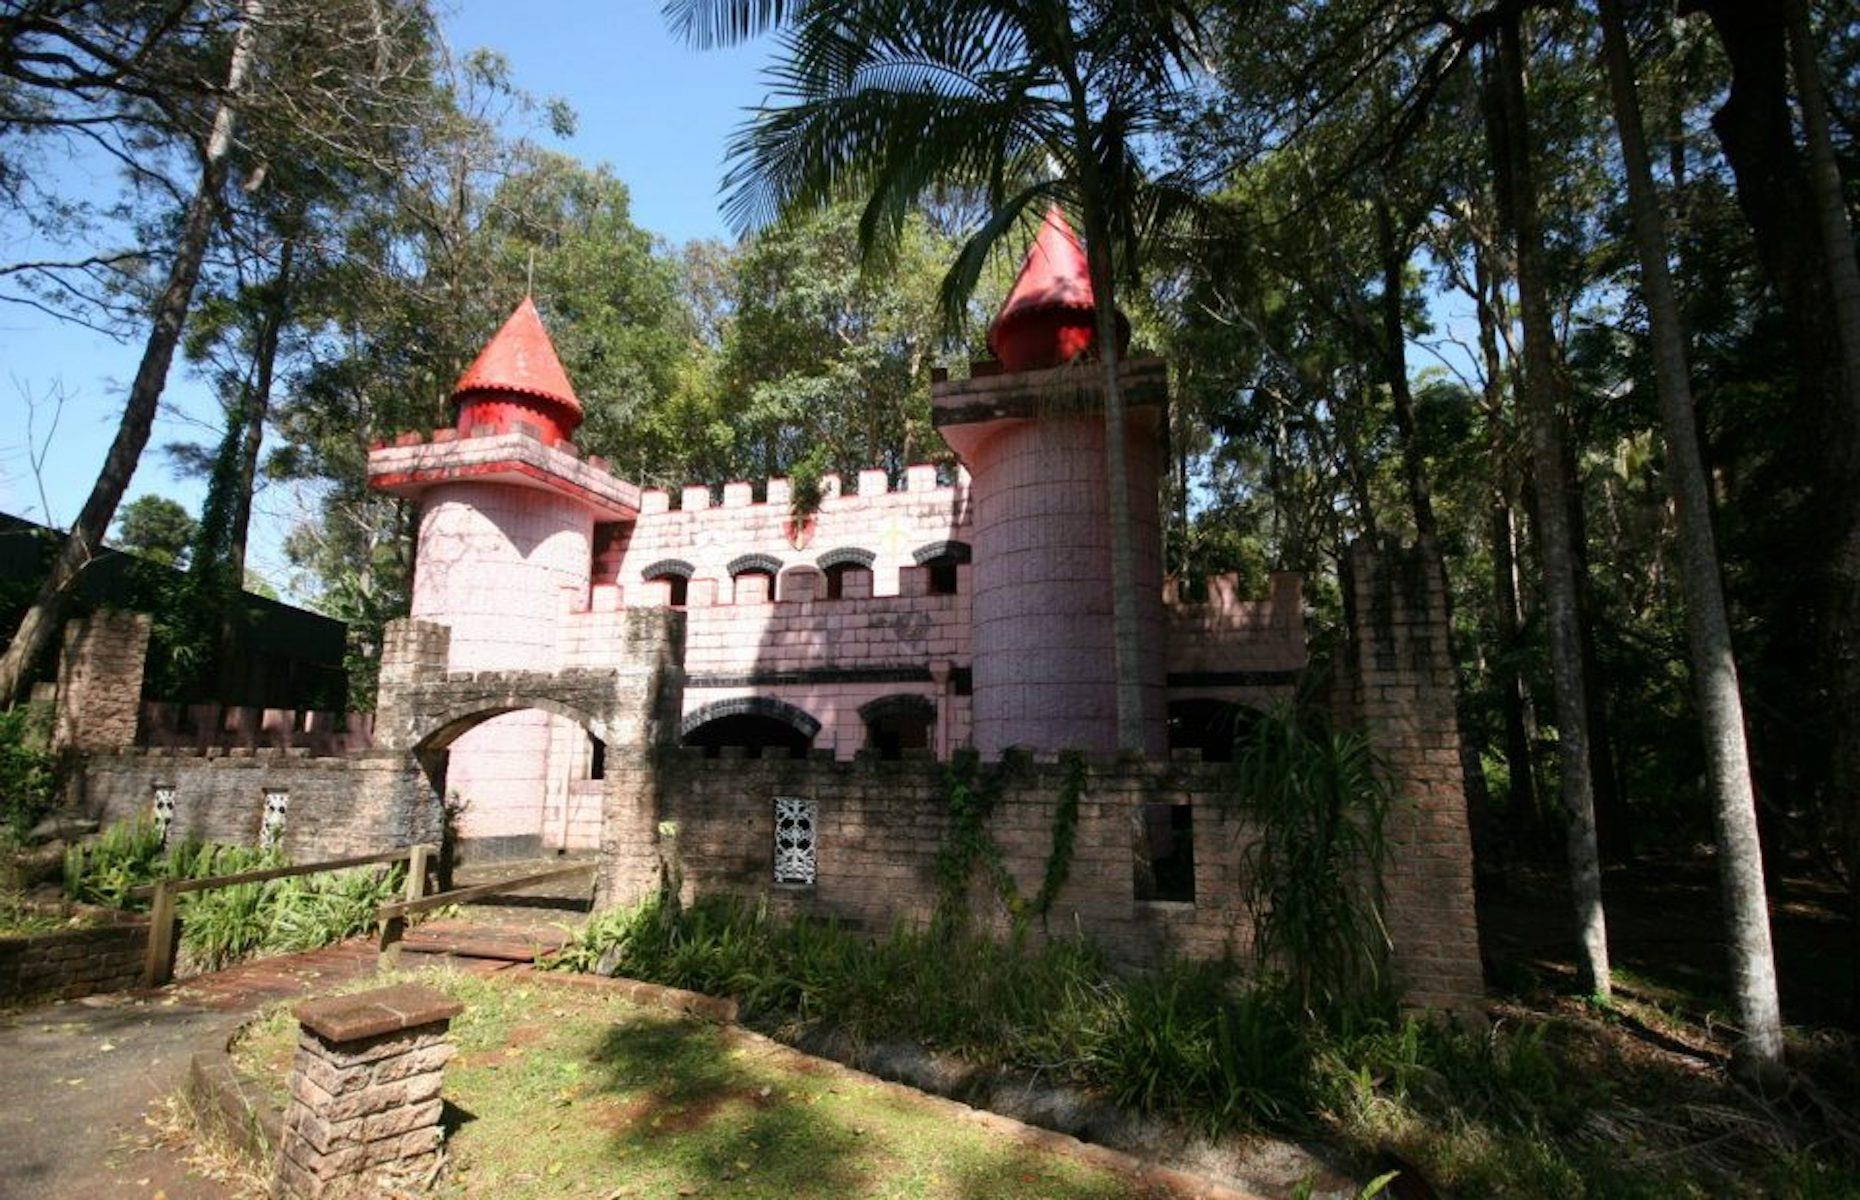 <p>Snow White’s cottage, Cinderella’s castle and the Old Woman’s shoe lie empty and shrouded in bushland near Port Macquarie. These abandoned structures were part of a fairy tale-themed amusement park that opened in the Sixties and fell into disrepair after its owners retired in the 1980s. A new owner came along in 2015 and gave some of the vandalized buildings a refresh with plans to restore it to a vacation cabin park. But concerns the development could disturb the local koala population means the site remains sealed off.</p>